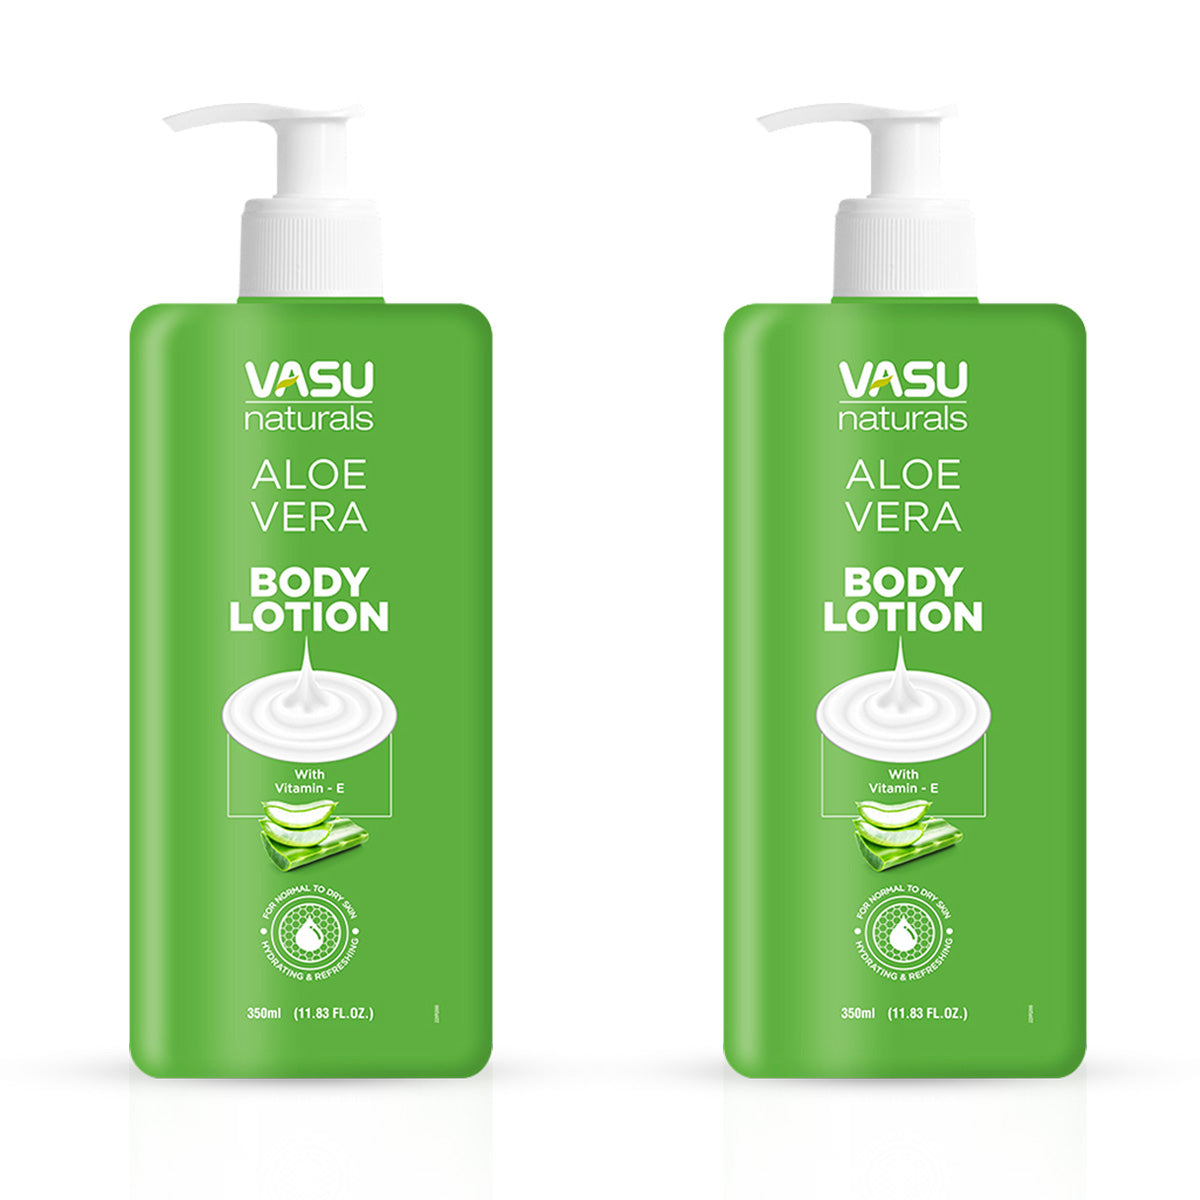 Vasu Naturals Aloe Vera Body Lotion - Enriched with Aloe Vera, Shea Butter & Vitamin E - Hydrating & Refreshing - Imparts a Youthful, Healthy & Glowing Skin - Pack of 2